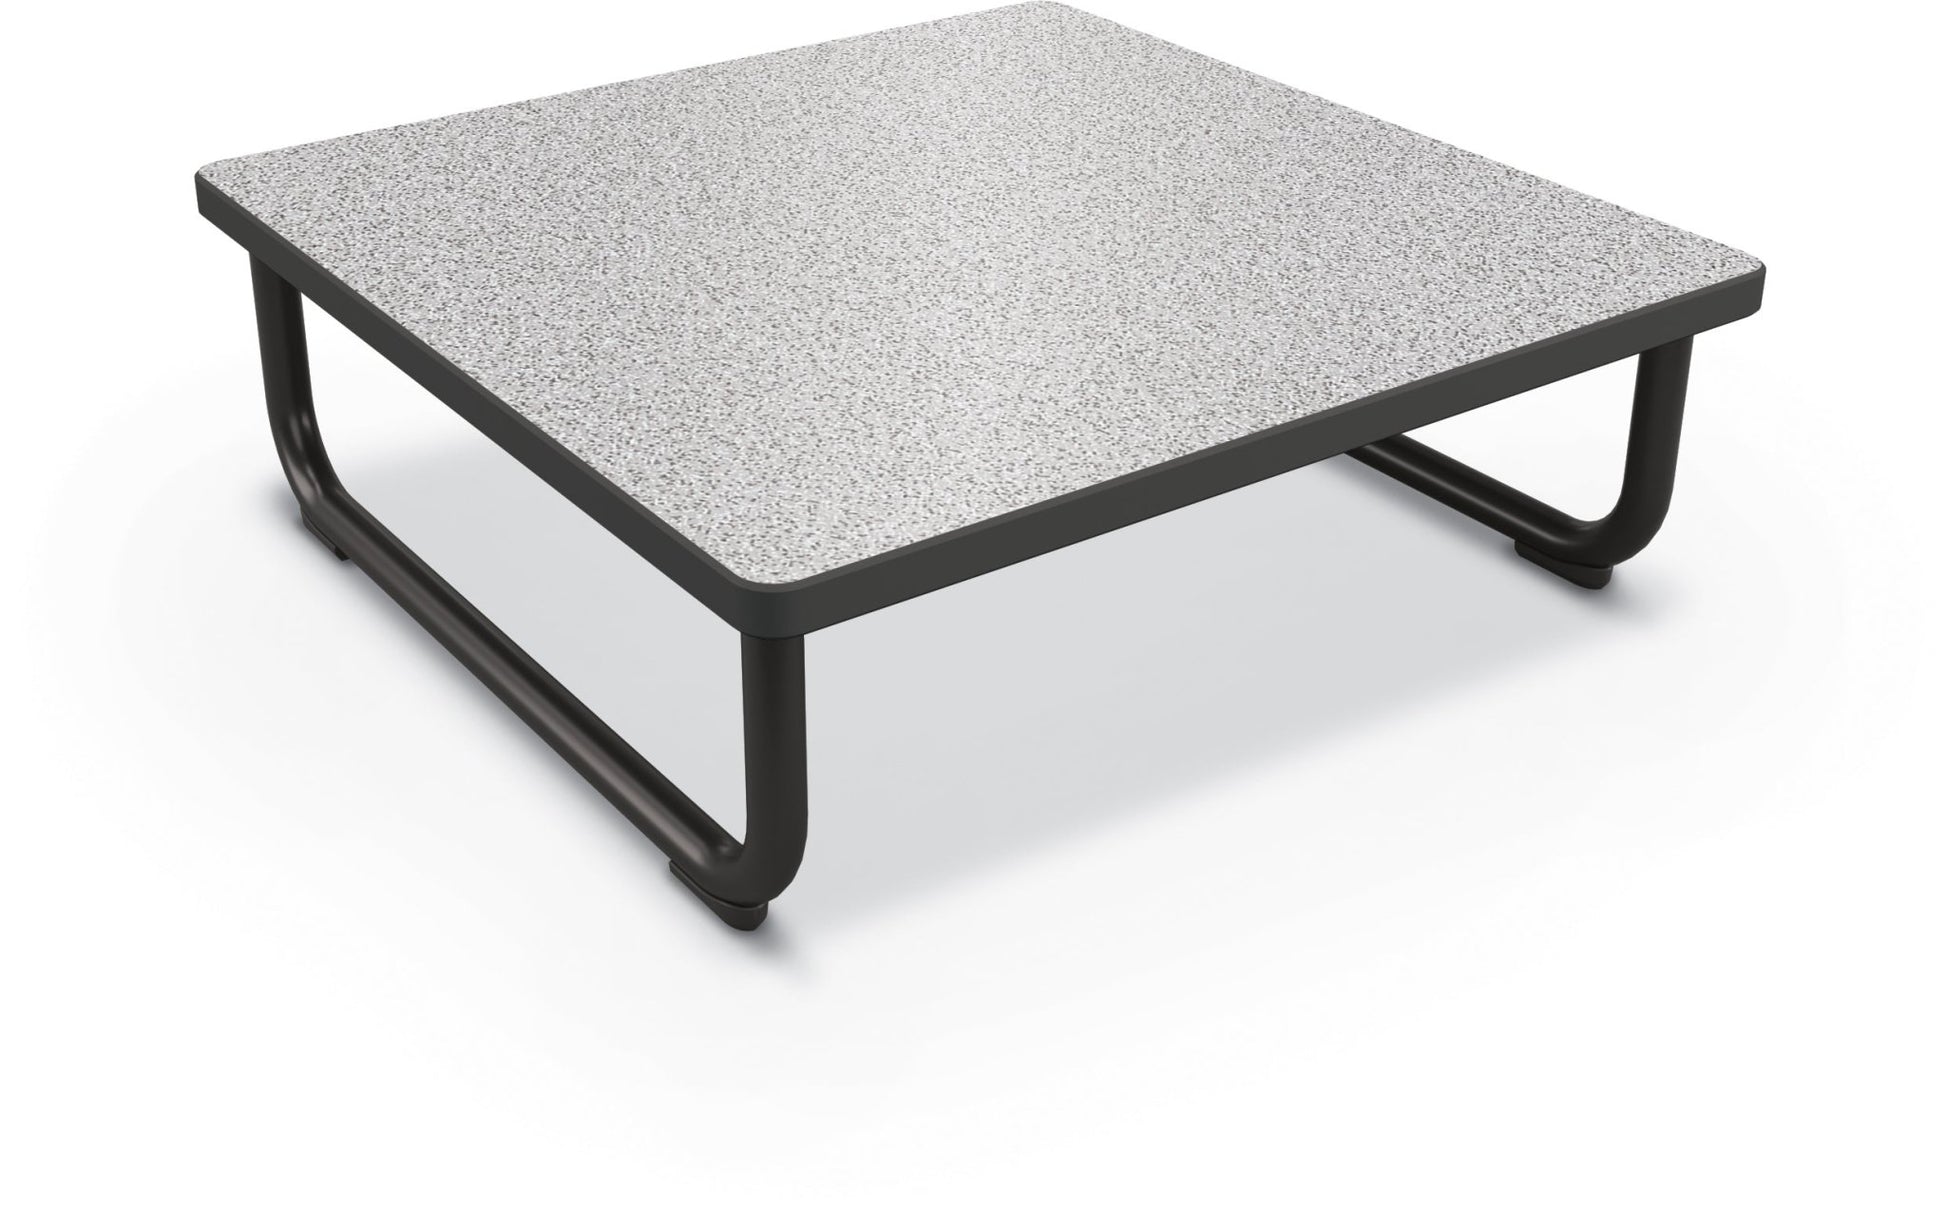 Mooreco Akt Lounge Single Seat Table - High-pressure Laminate (HPL) Top Surface - SchoolOutlet